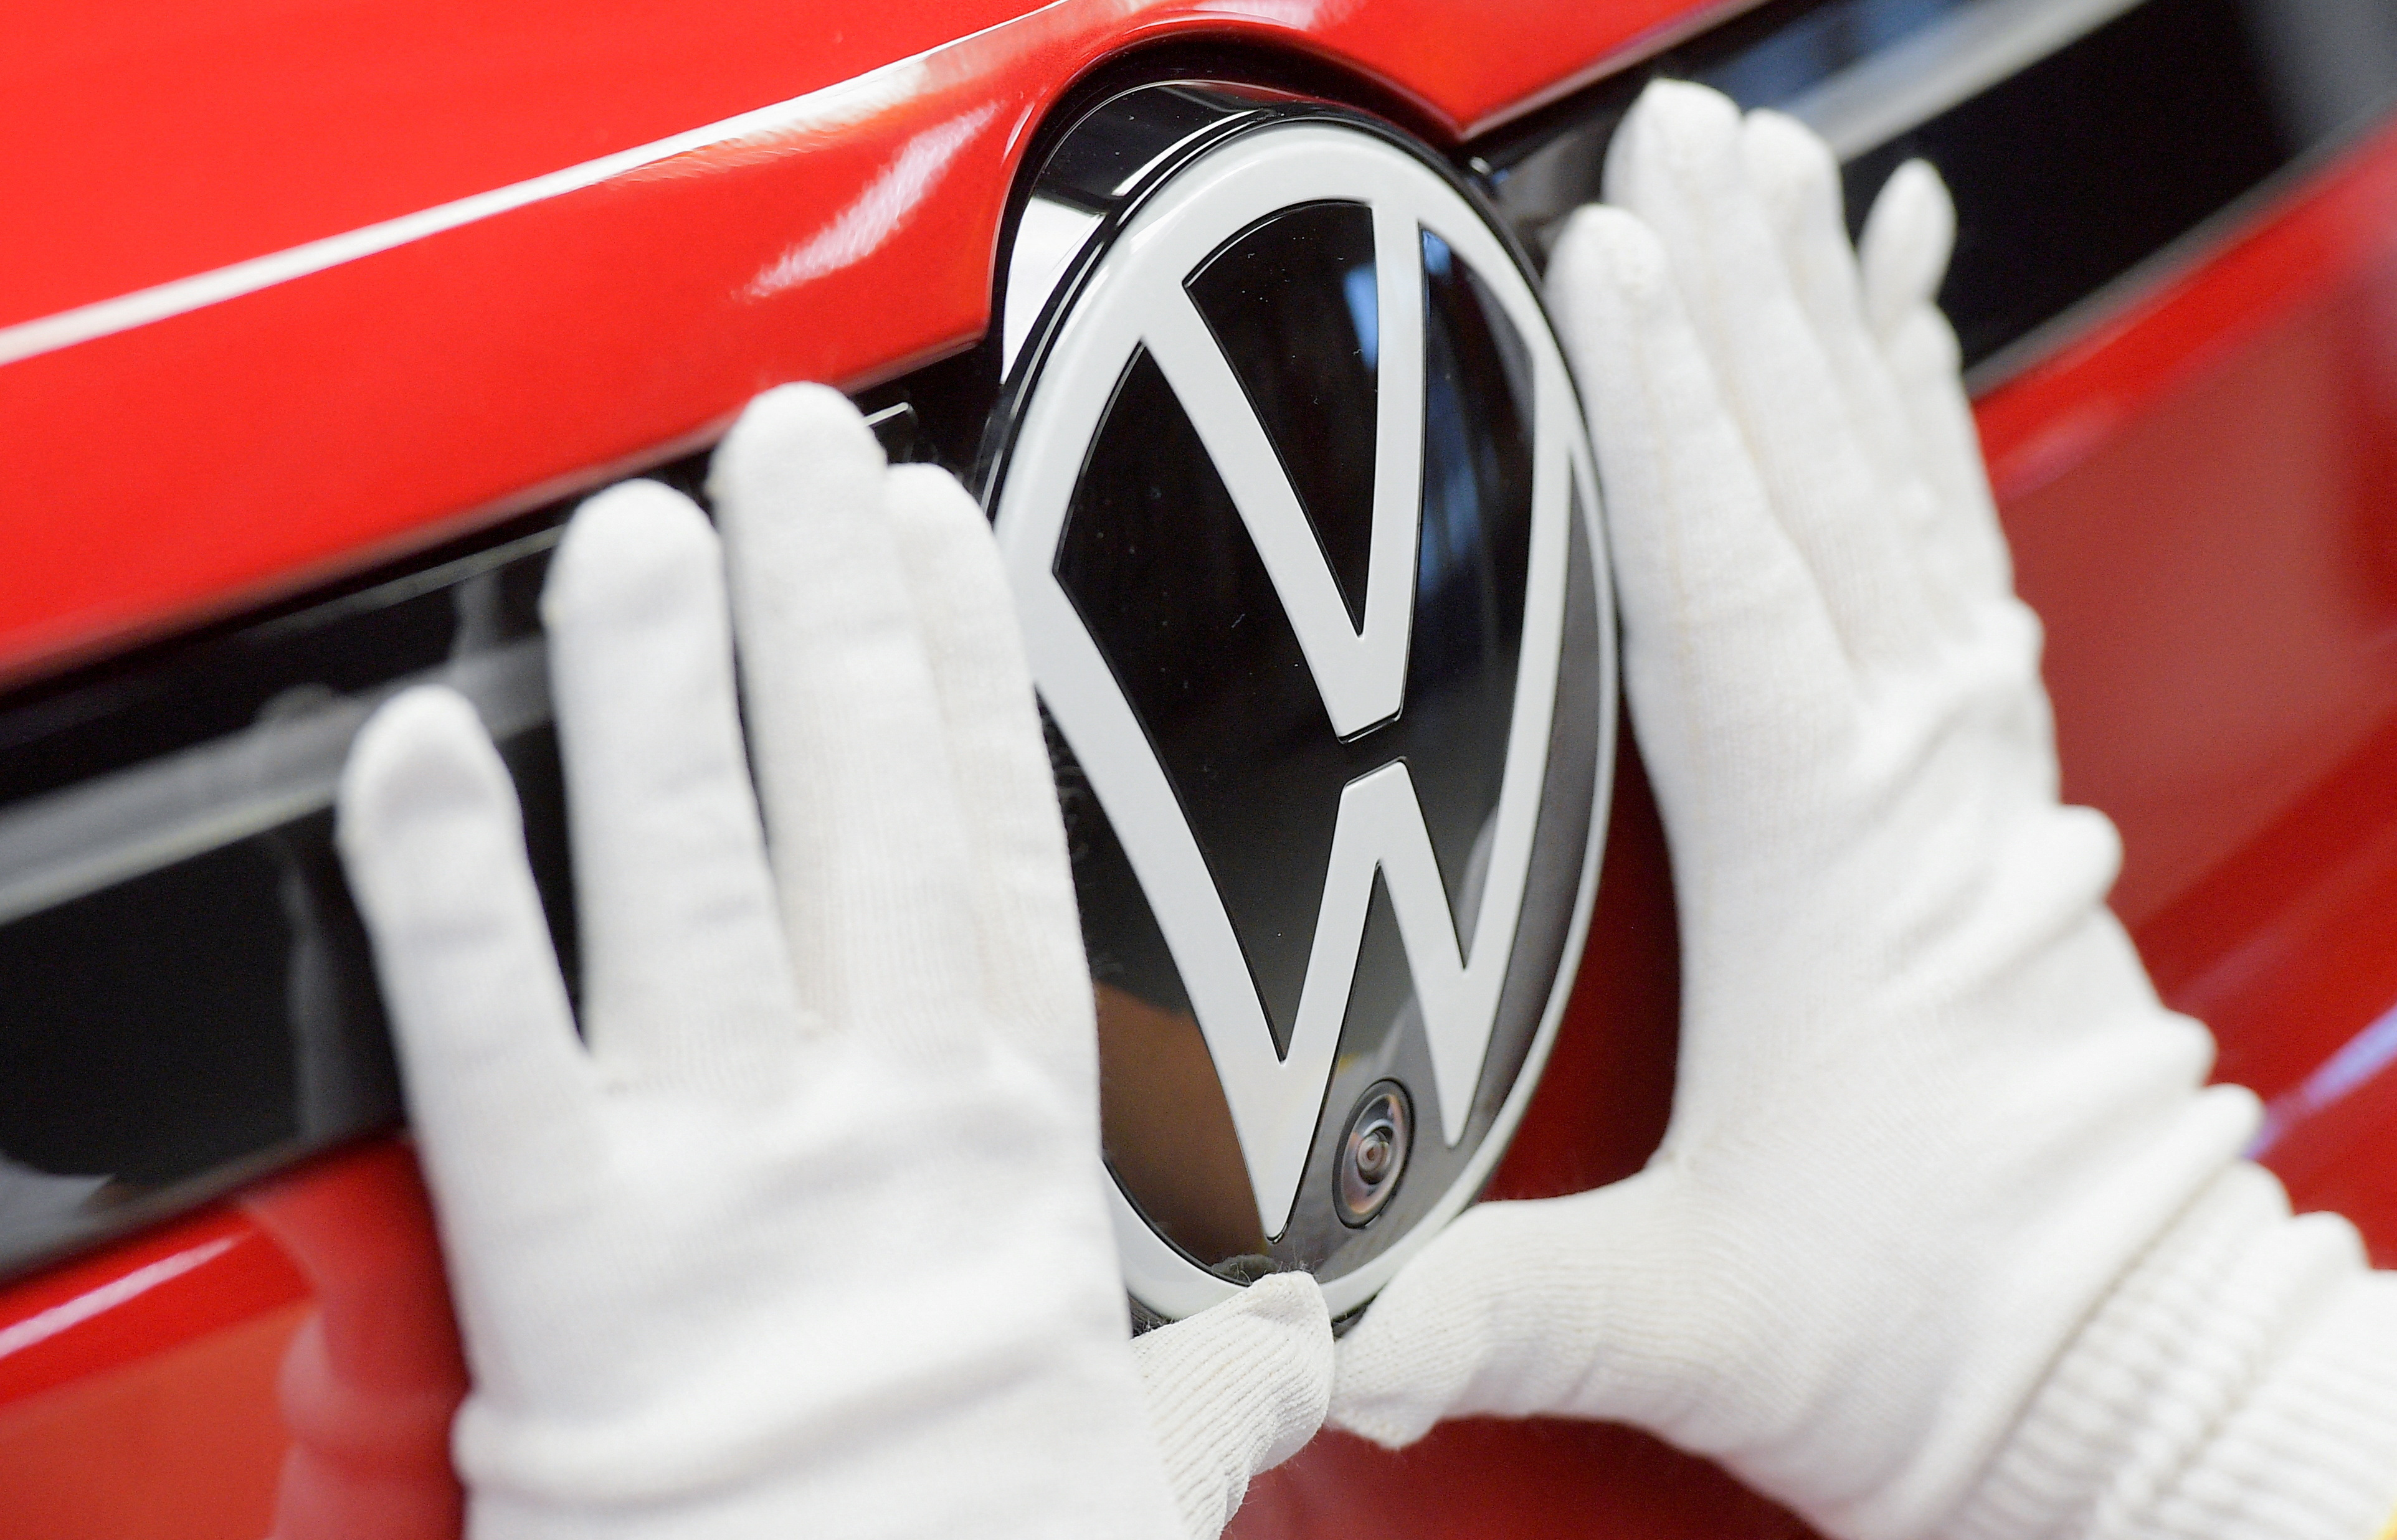 VW brand said to be behind on $10.5 billion cost-cutting drive